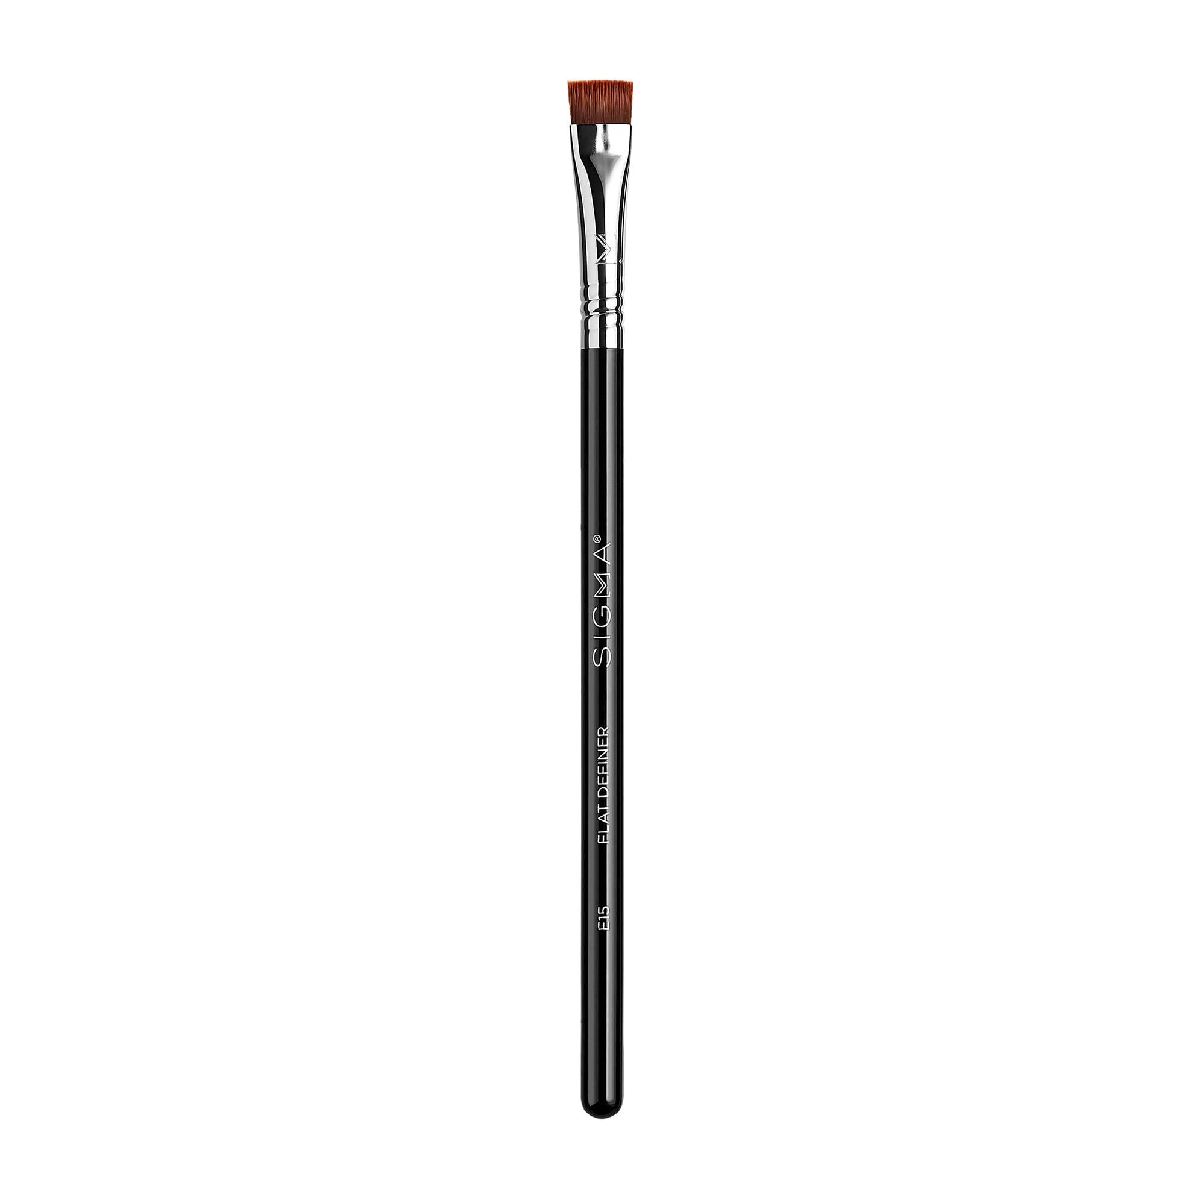 Sigma Beauty E15 Flat Definer Makeup Brush - a precise makeup brush on a white background.